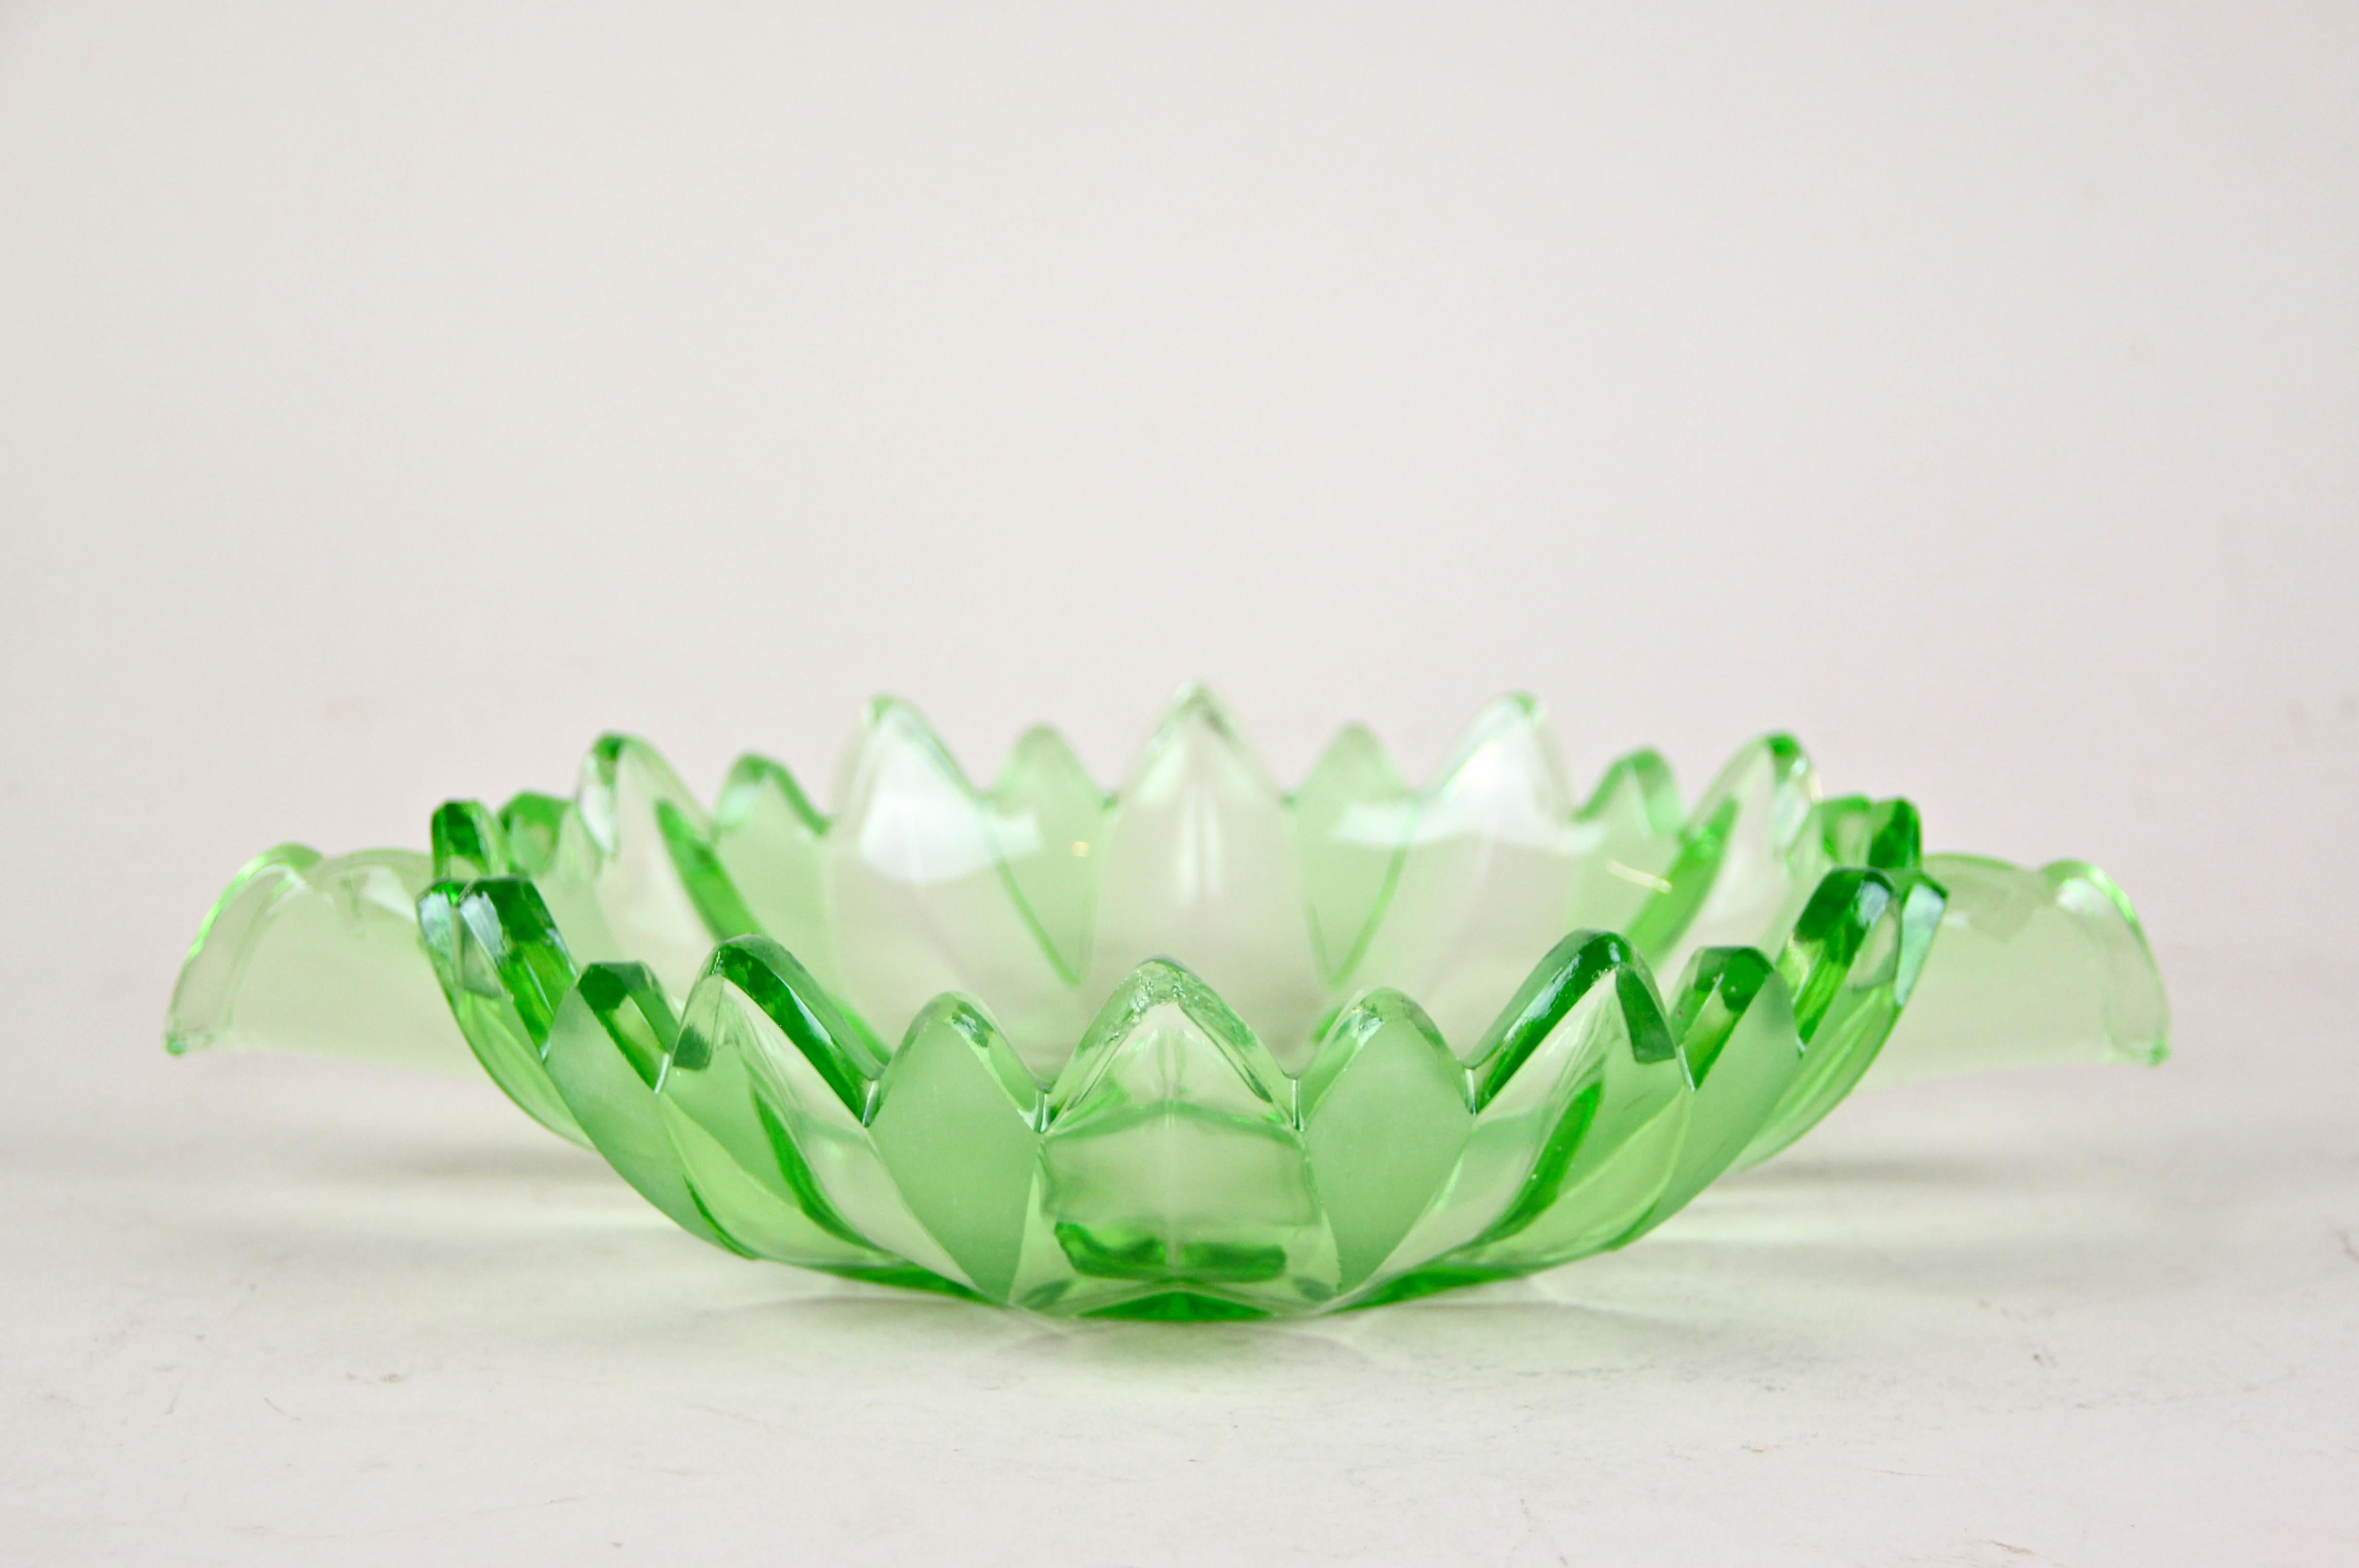 Delicate Art Deco glass centerpiece out of Austria from the period, circa 1930. Colored in a beautiful rose tone, this very decorative glass centerpiece impresses with its shape and charming design elements. The artfully glass bowl offers space for